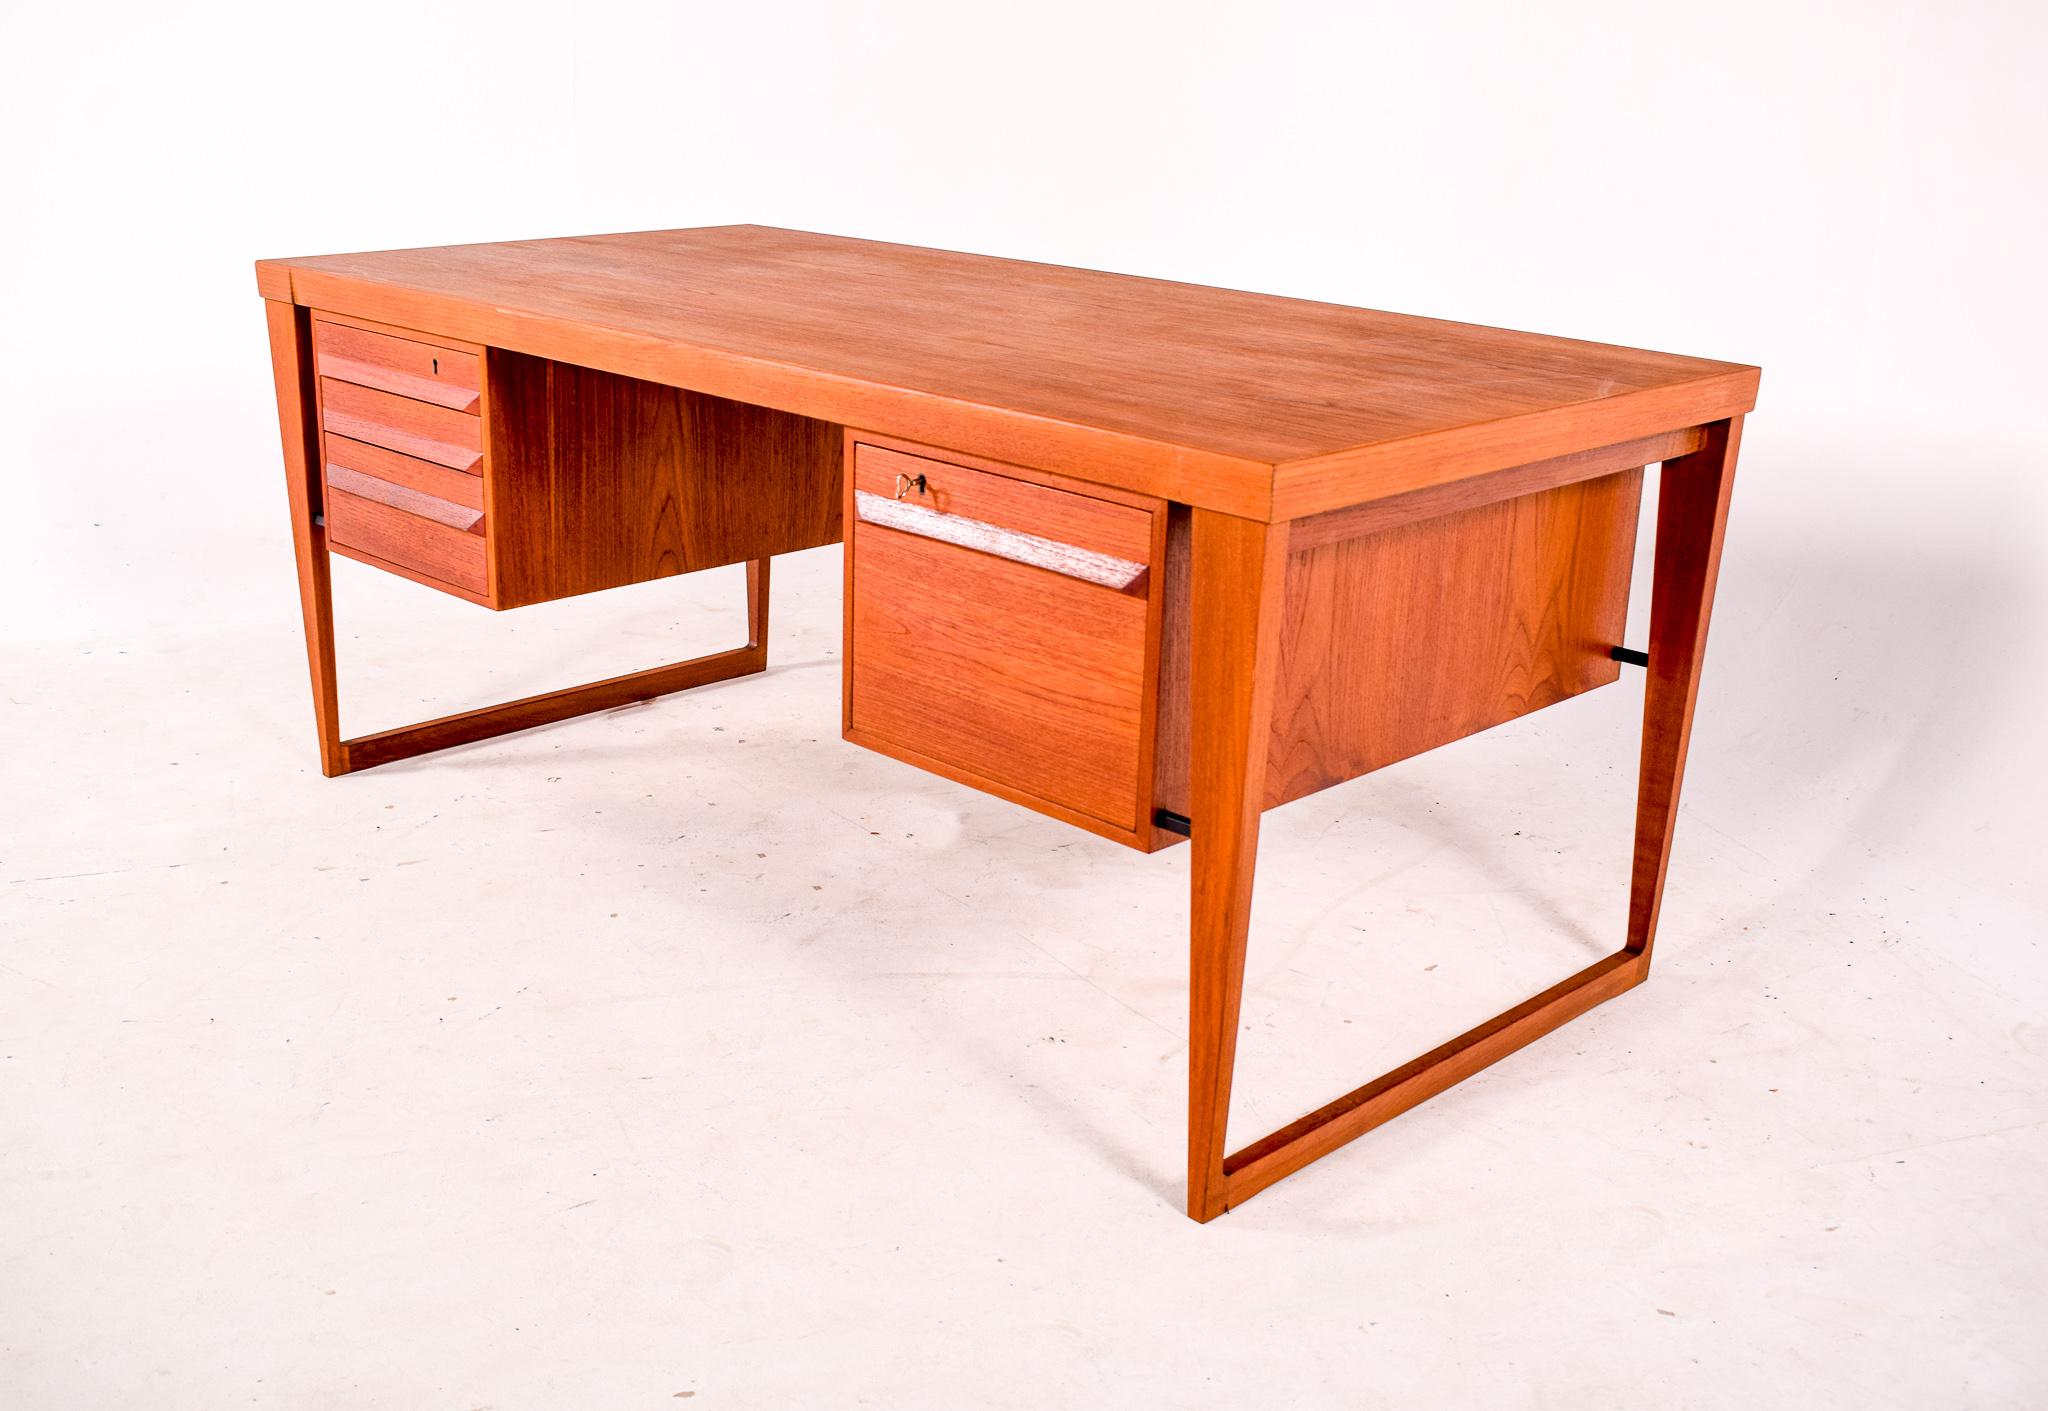 Kai Kristiansen design this large desk in 1950s for Feldballe Mobelfabrik. Model n. 70 in teak wood. This desk have six drawers on the front and two doors on the backside. Very quality danish desk with nice design.